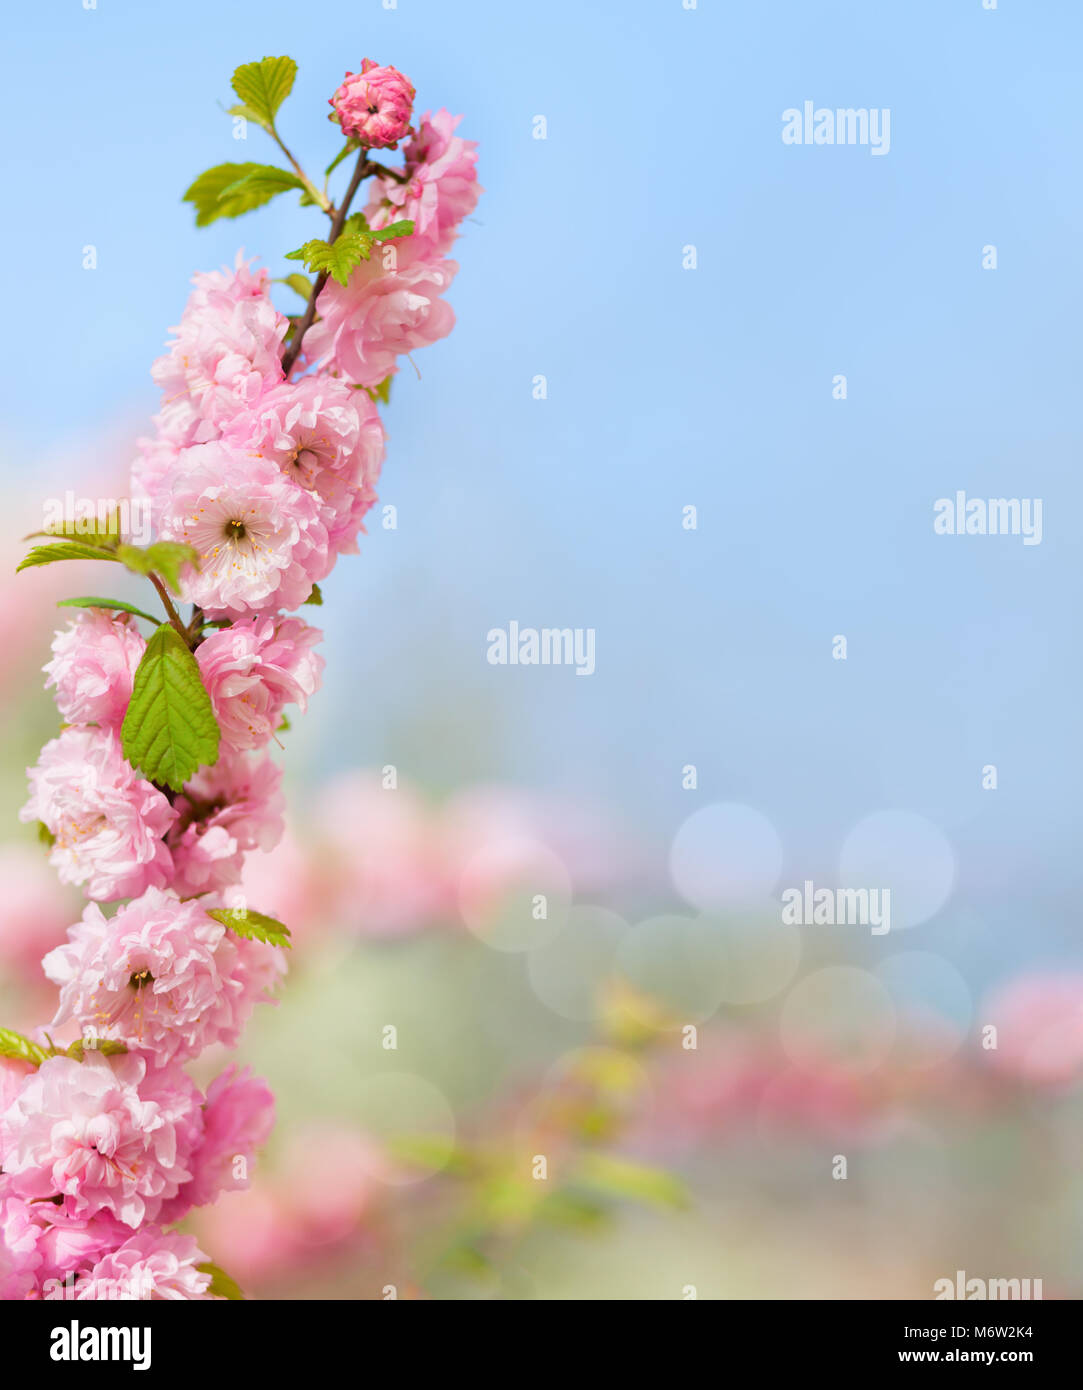 Branch with beautiful pink flowers (Amygdalus triloba). Very shallow depth of field. Stock Photo